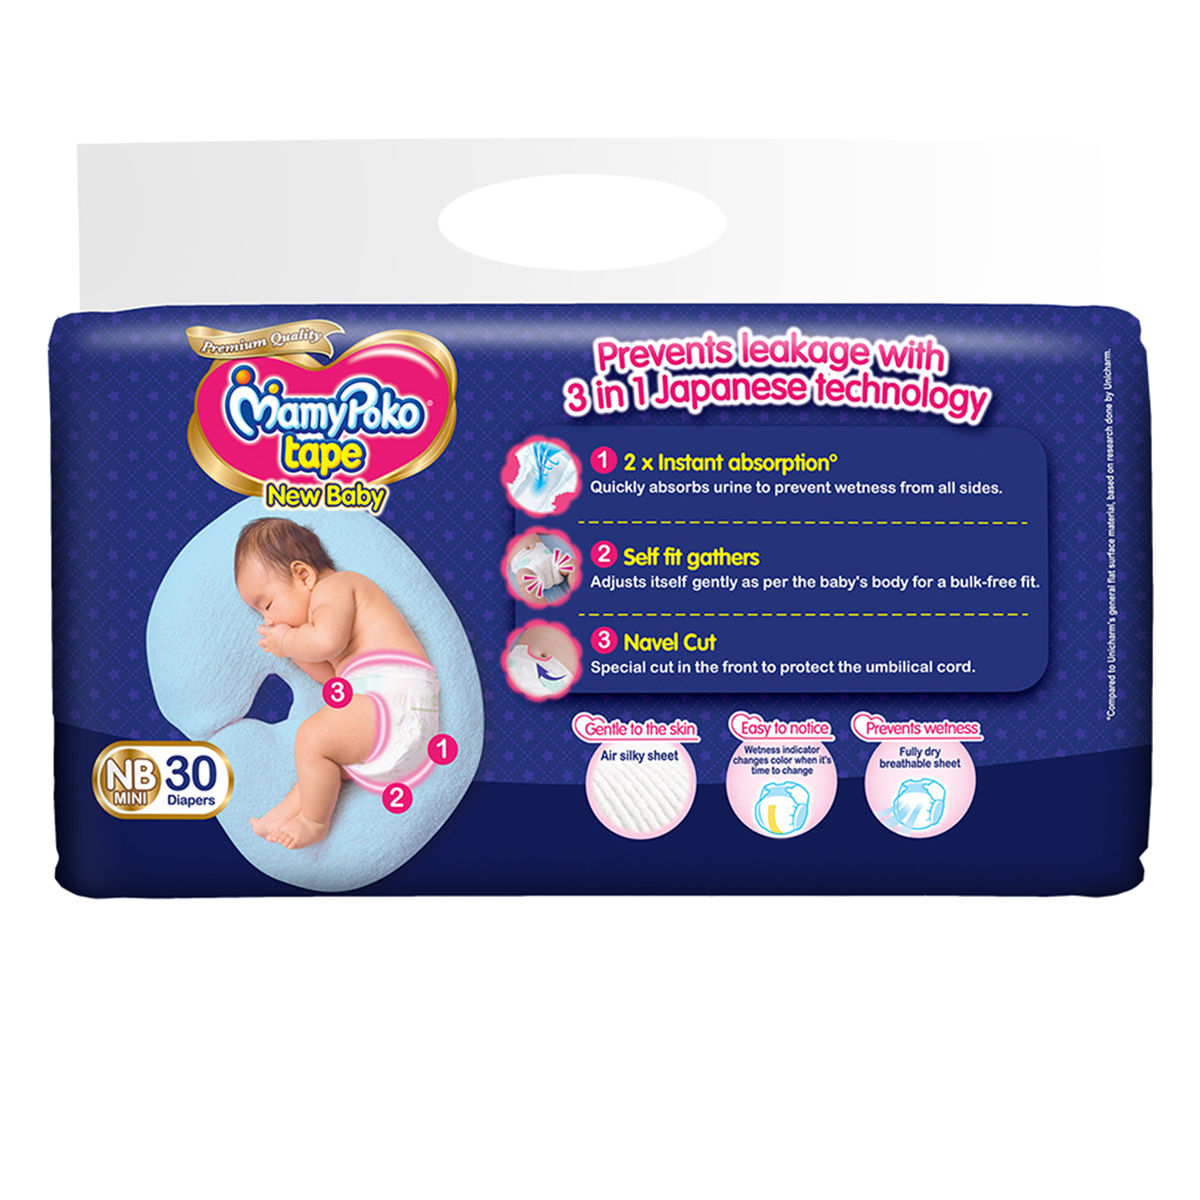 MamyPoko Extra Absorb Pants Style Diapers Medium 58 Pieces Online in India  Buy at Best Price from Firstcrycom  12022304